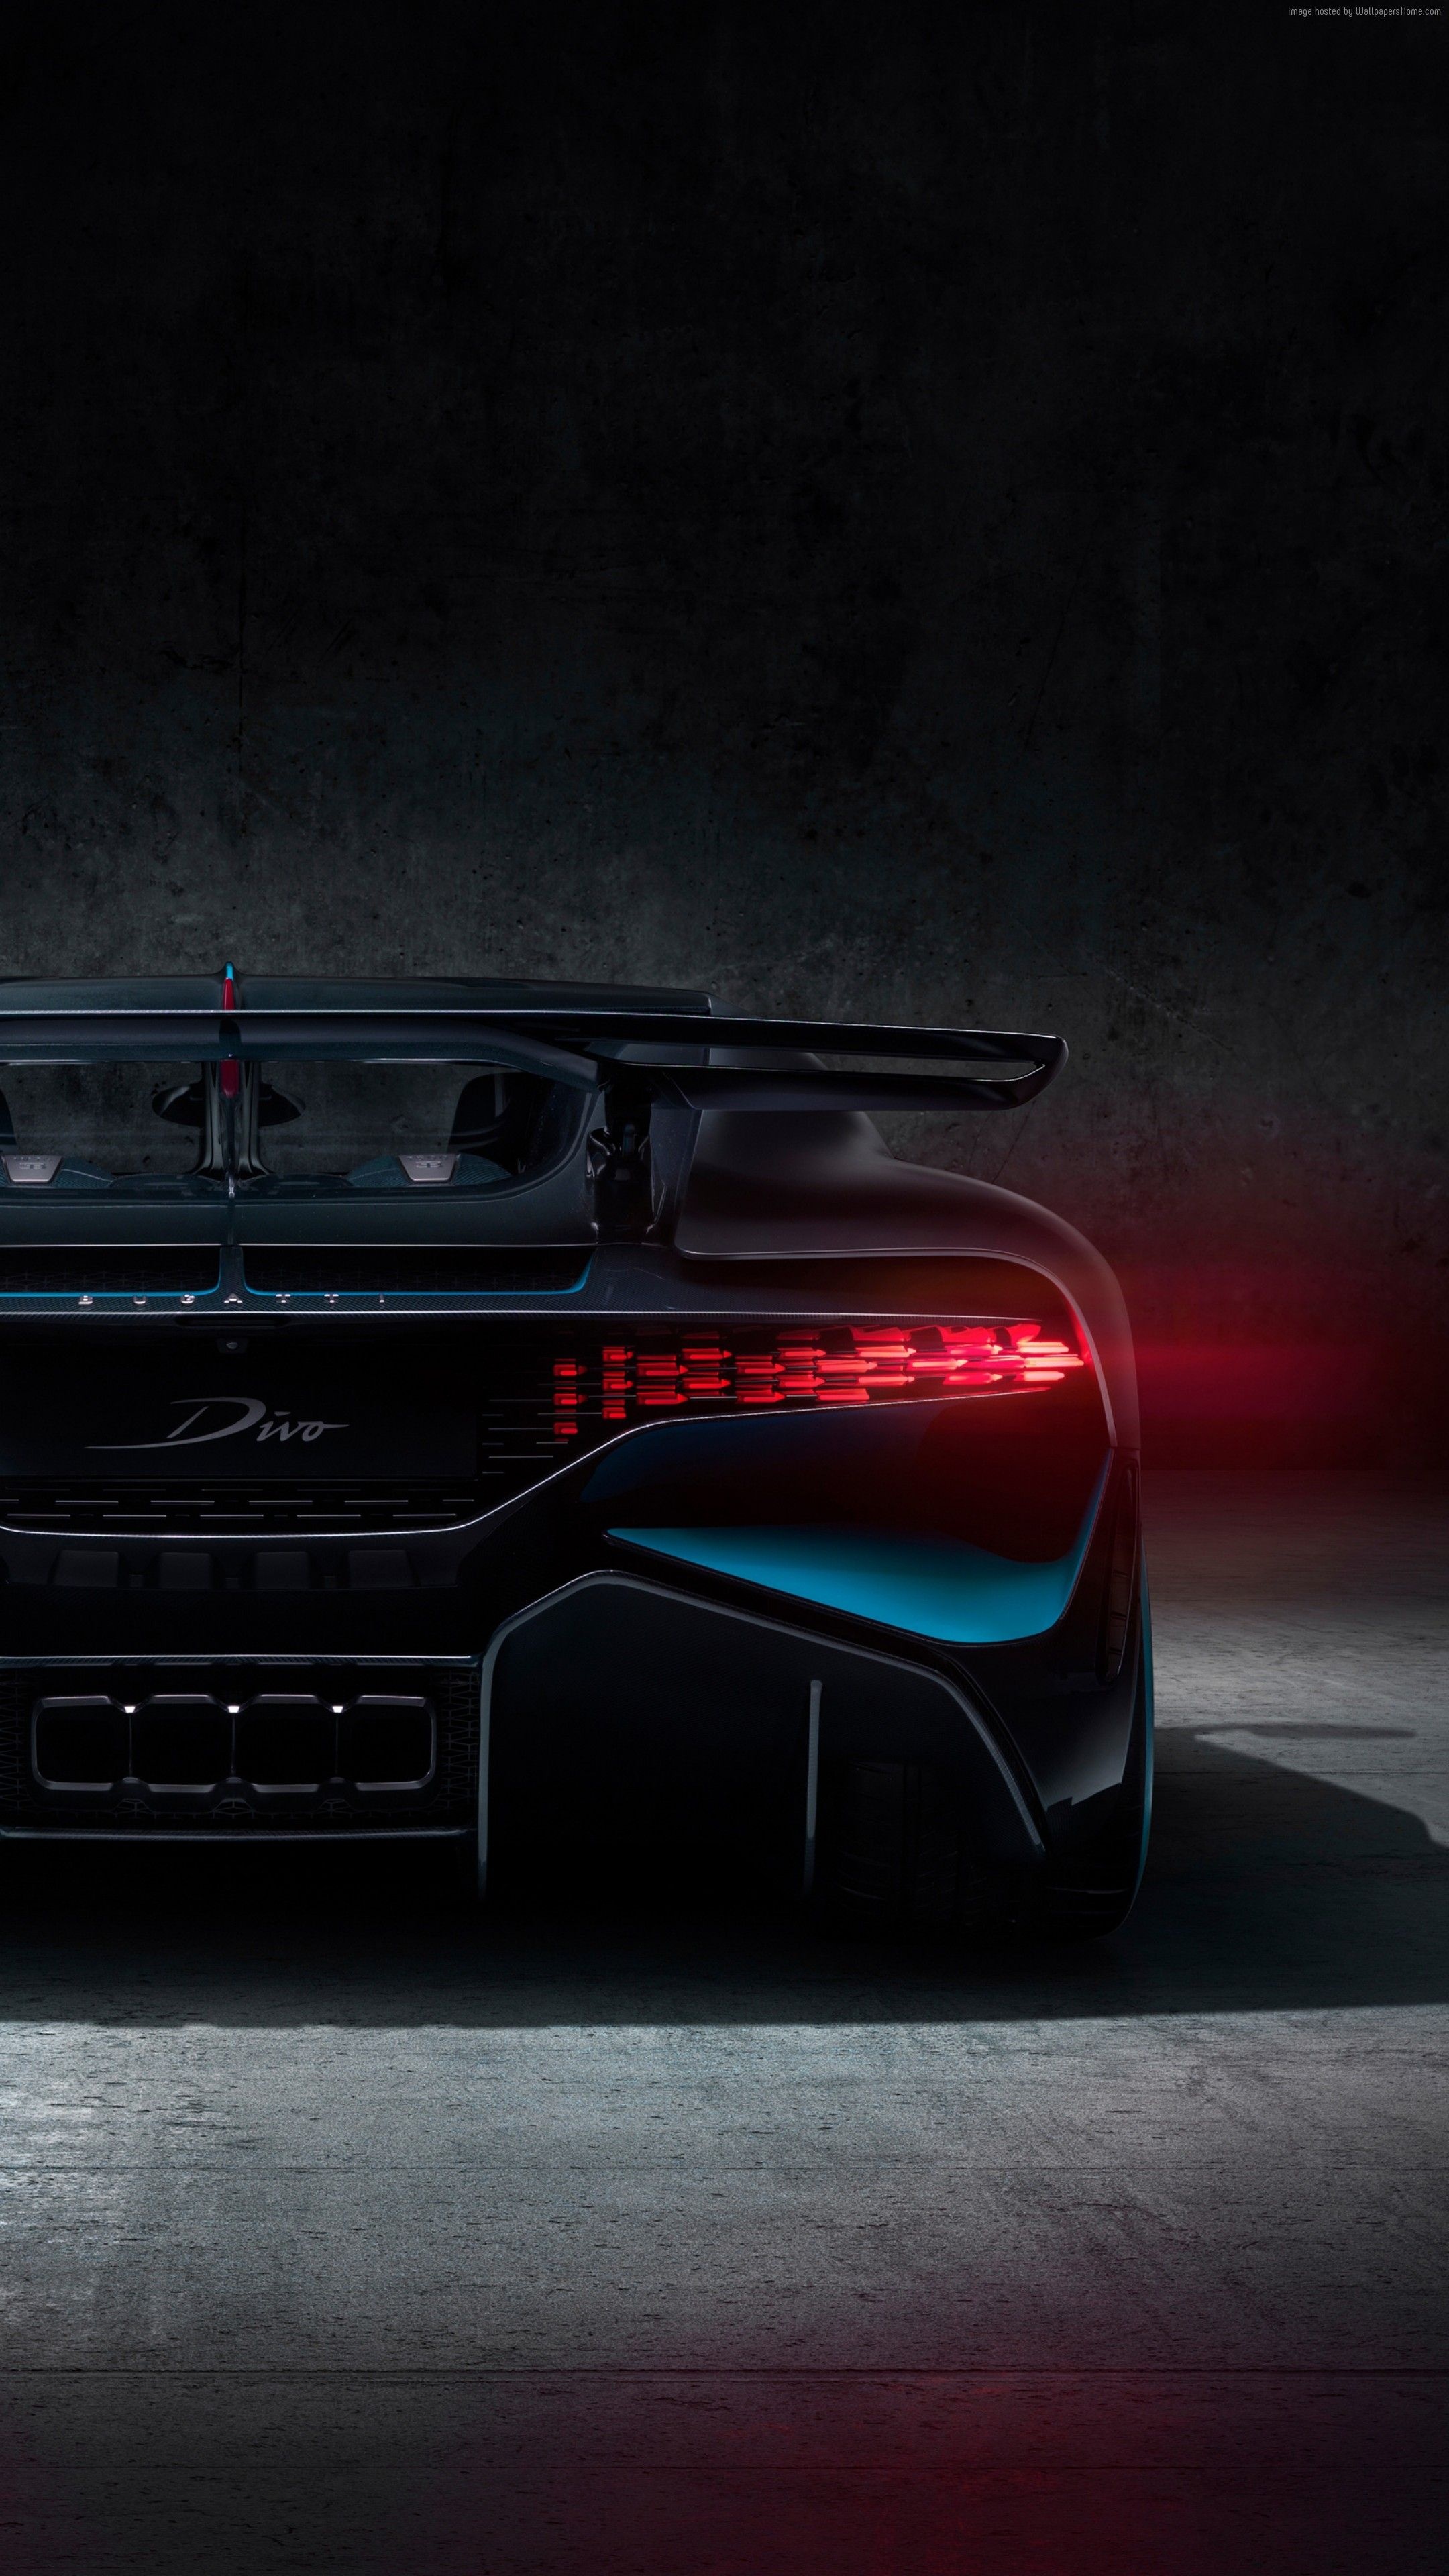 Bugatti Divo, Exclusive wallpapers, High-quality images, Luxury auto, 2160x3840 4K Handy